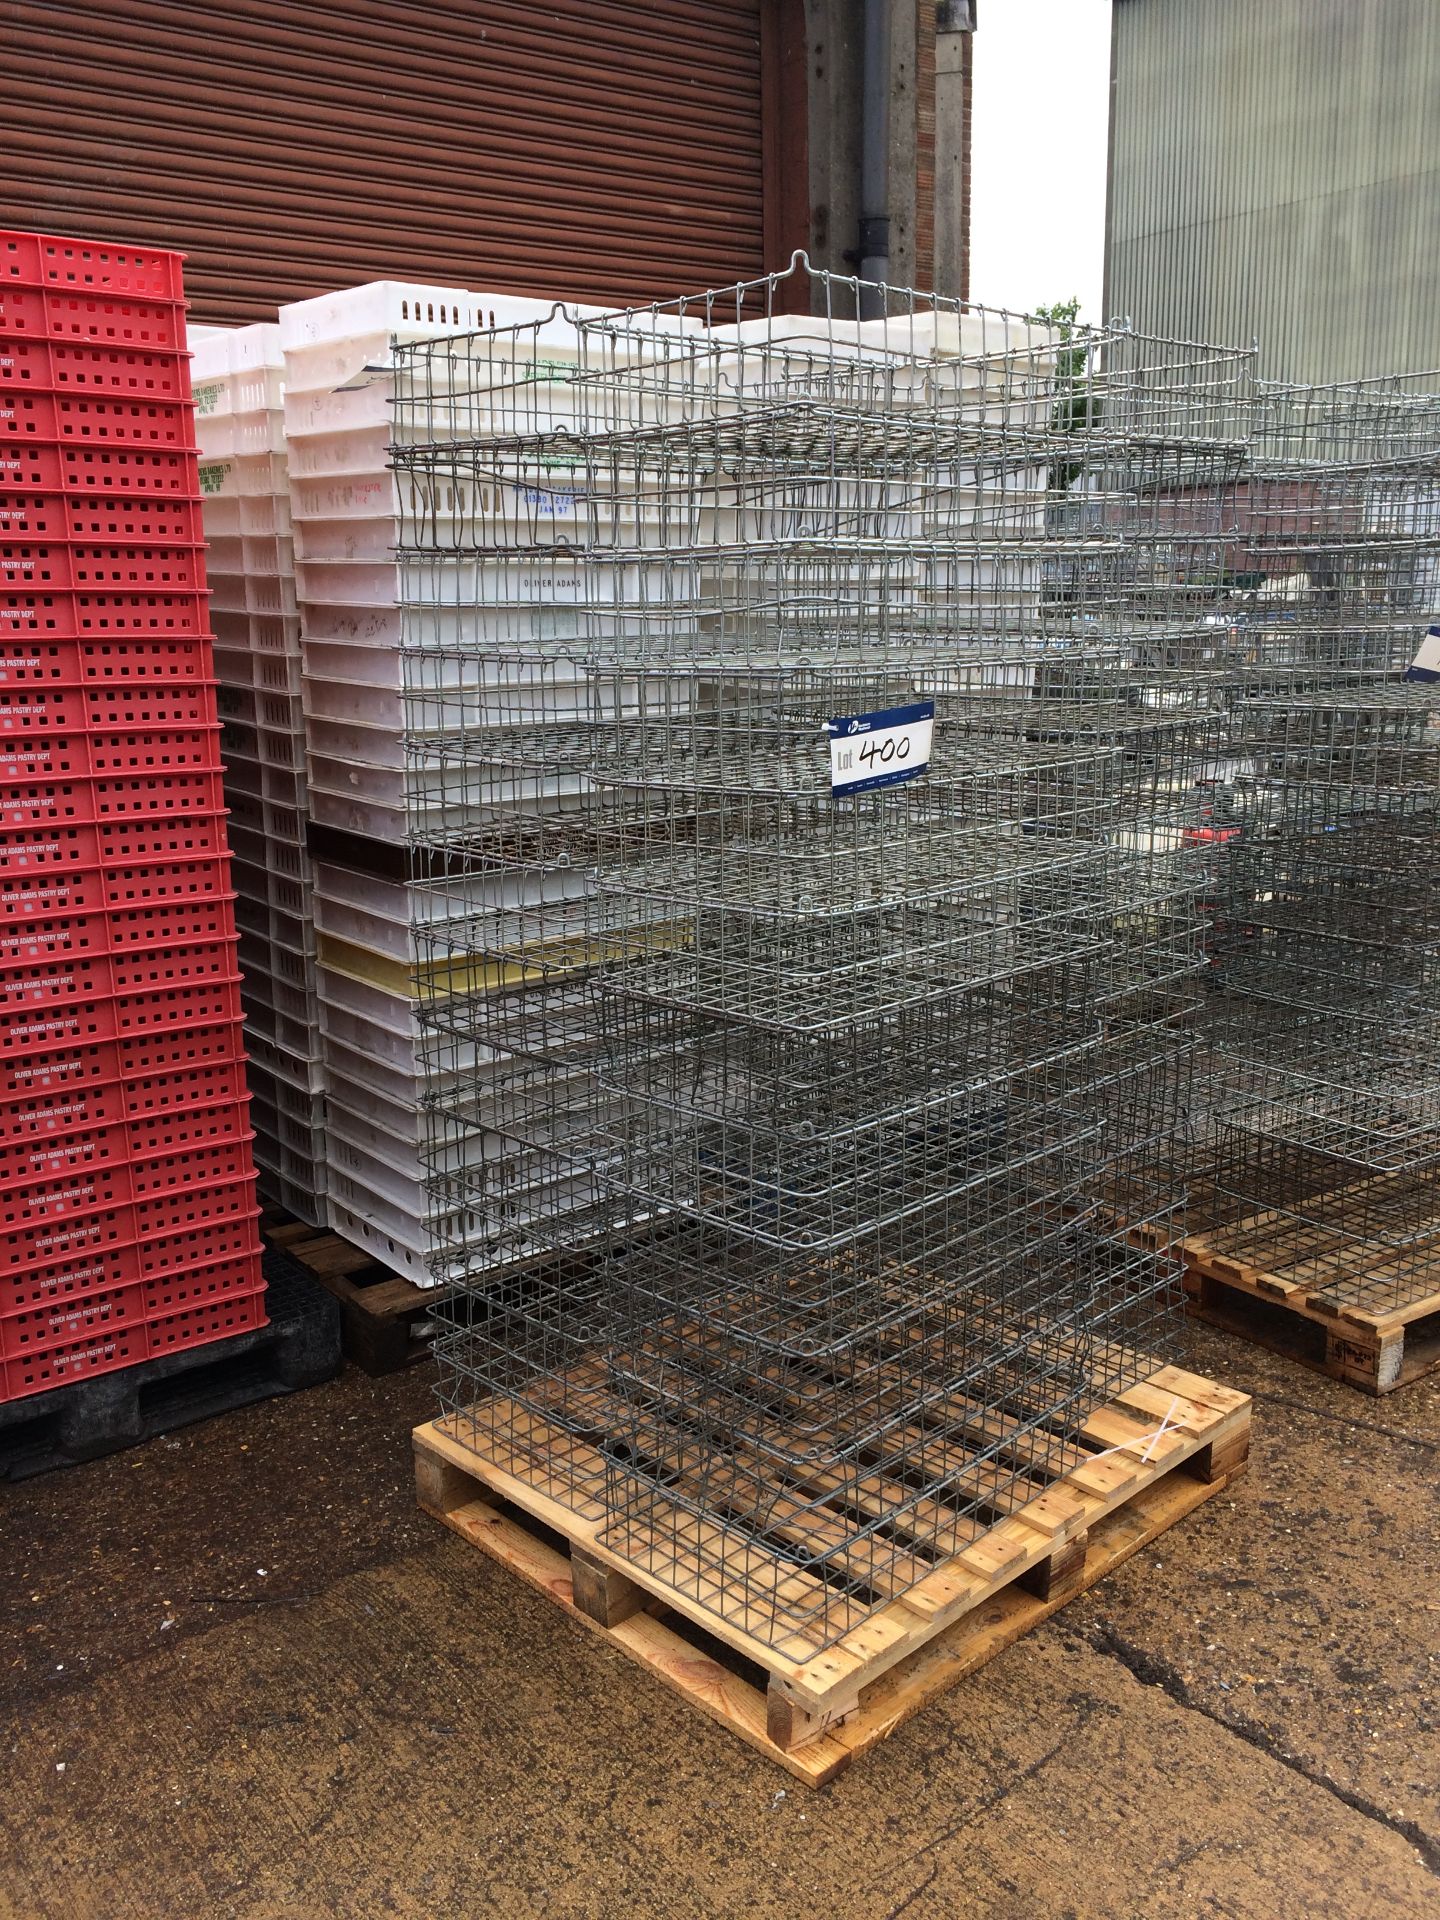 Approx. 36 Wire Baskets on 2 Trolleys (Lift Out Ch